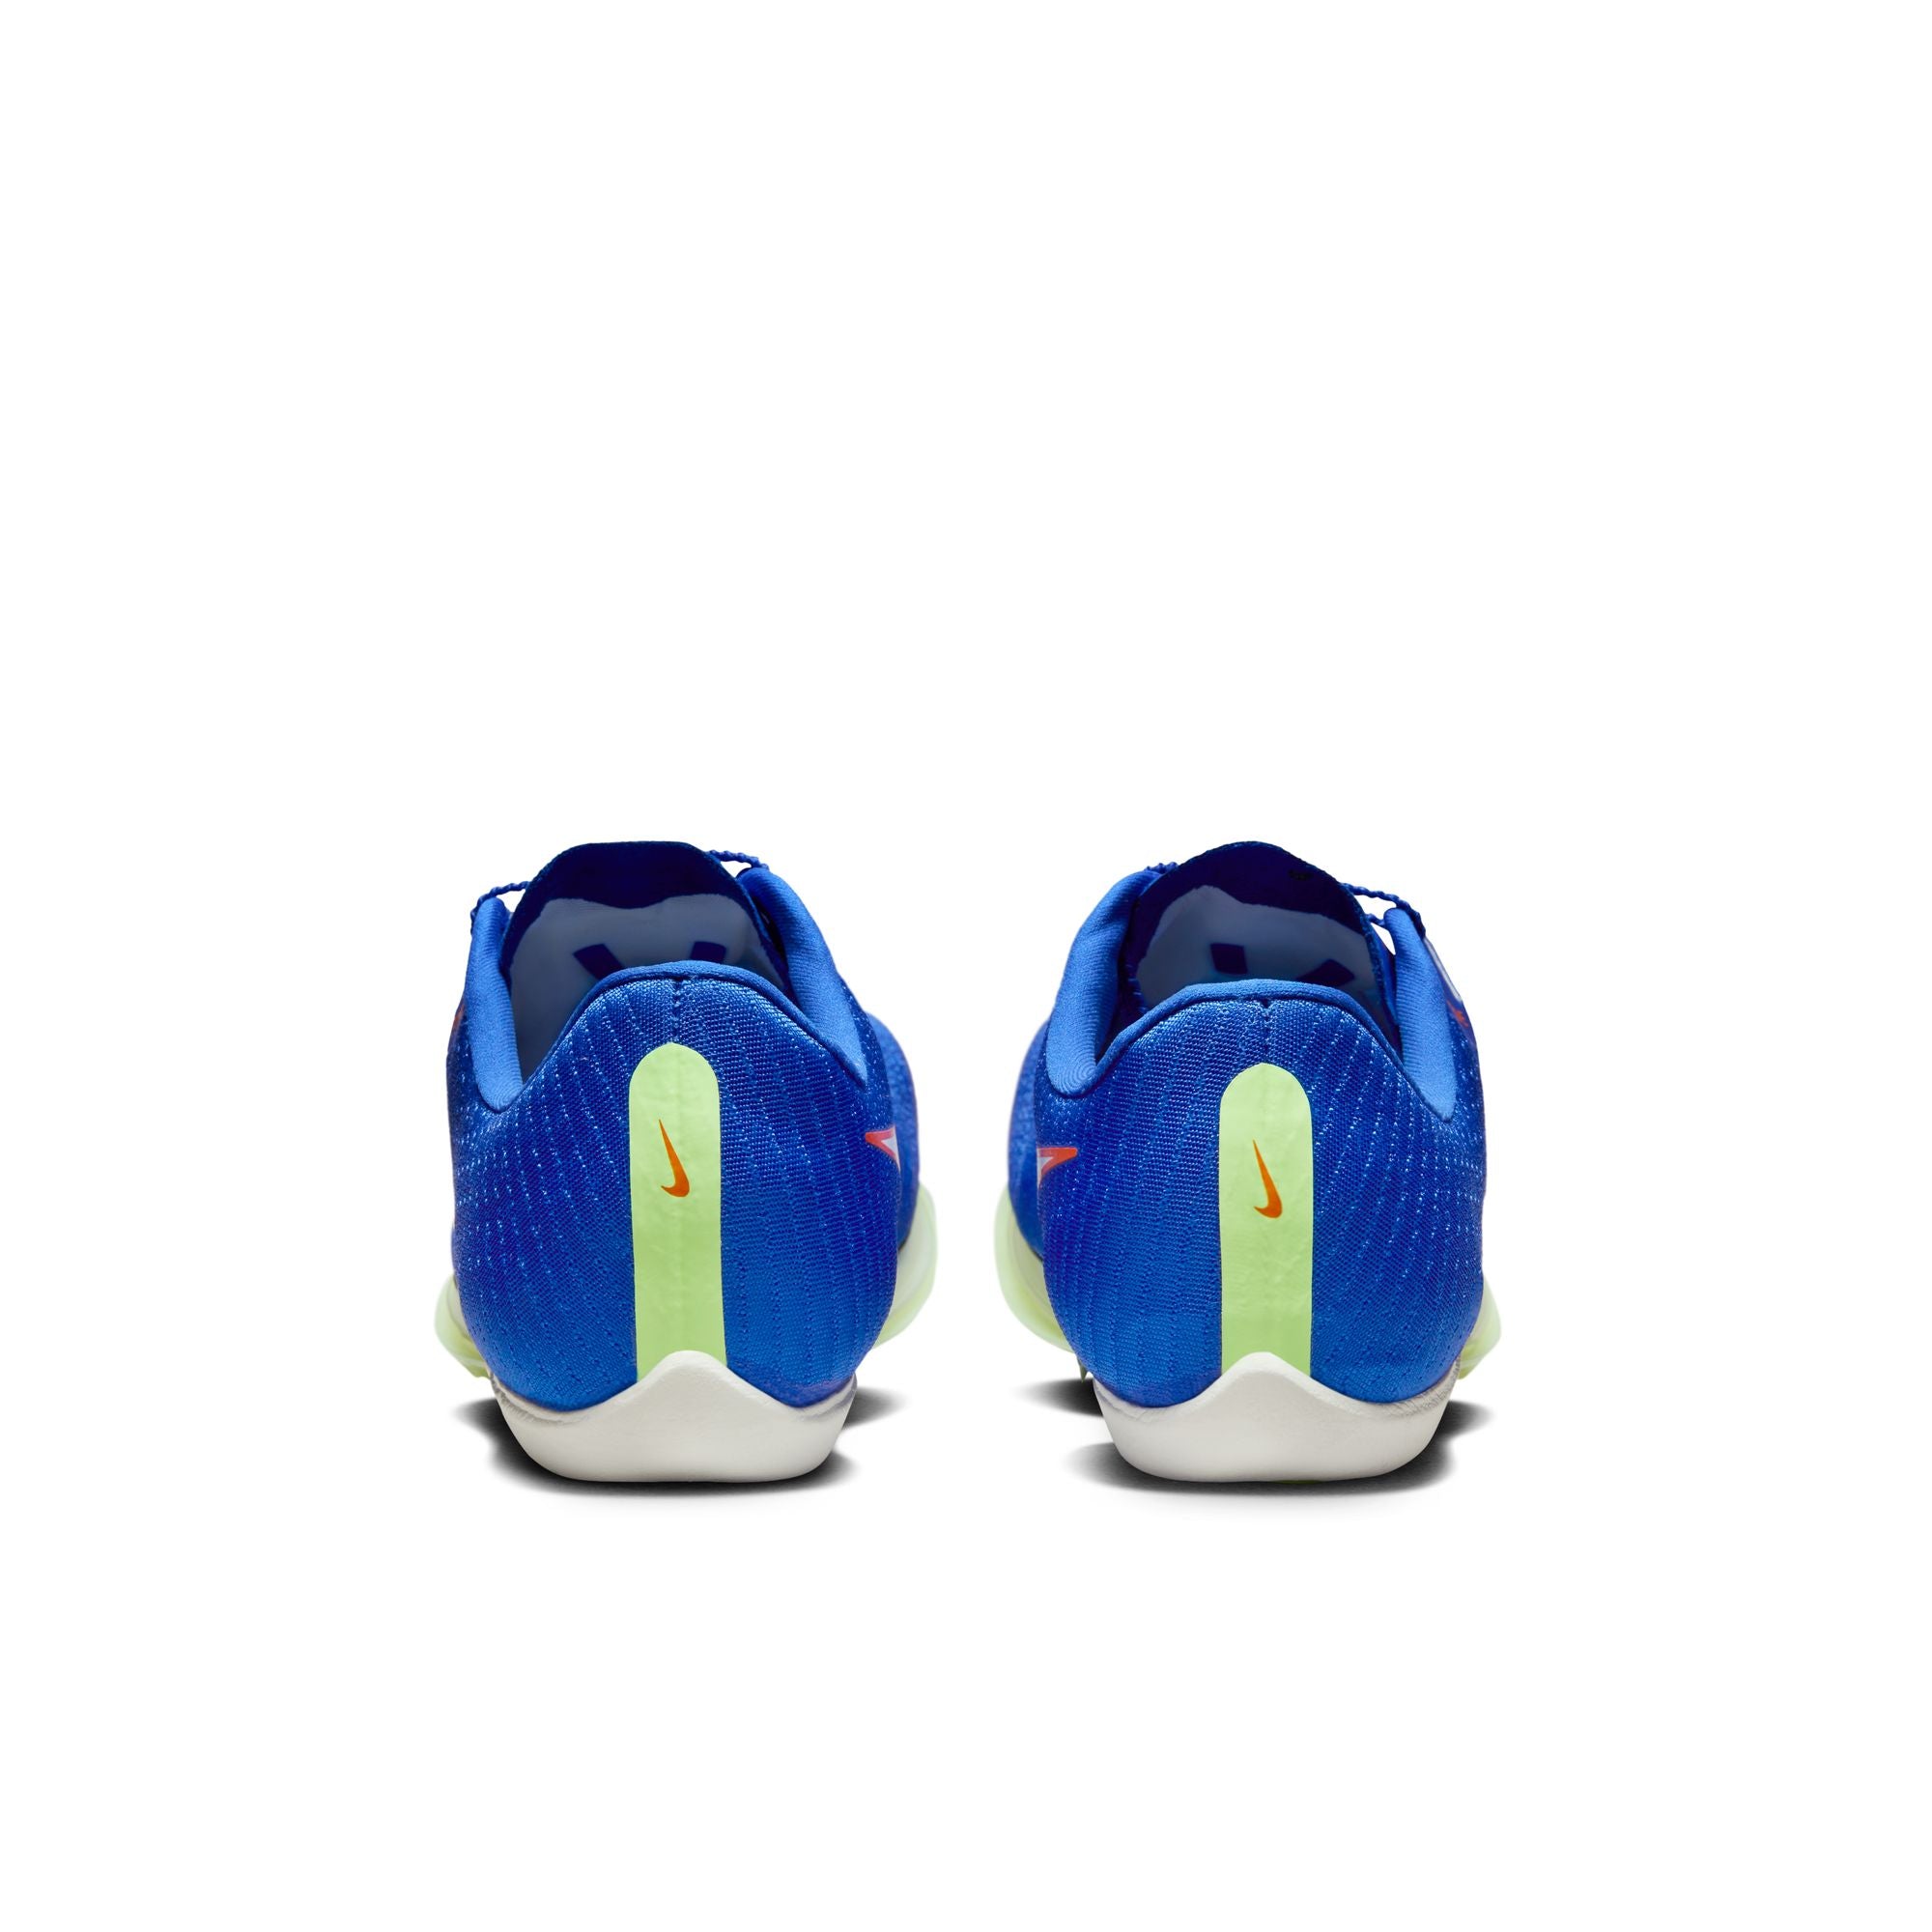 air zoom maxfly 400 racer blue white lime 